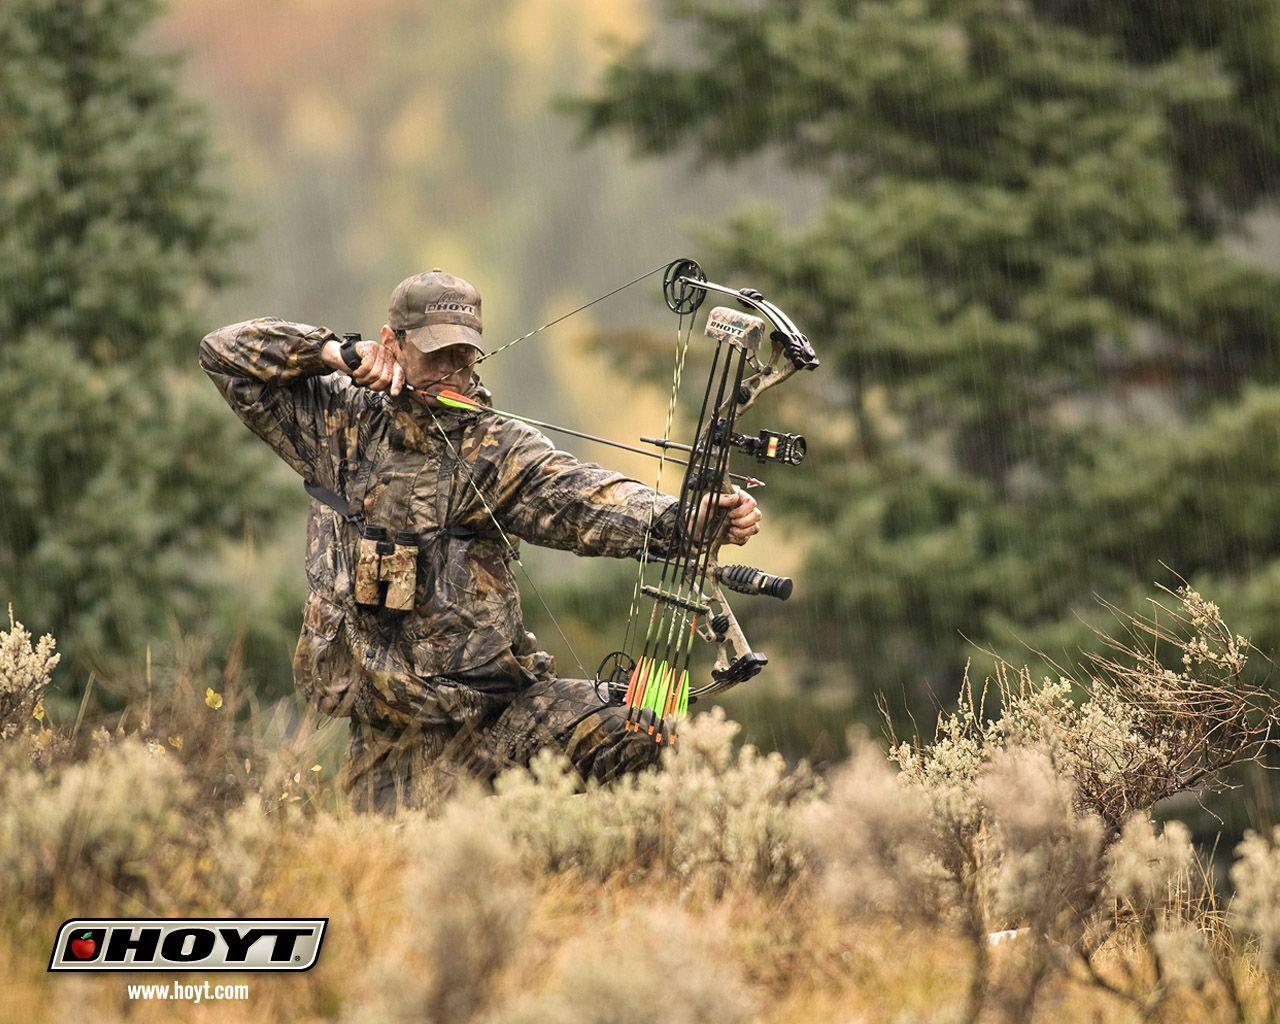 Hoyt Archery Wallpapers - Wallpaper Cave